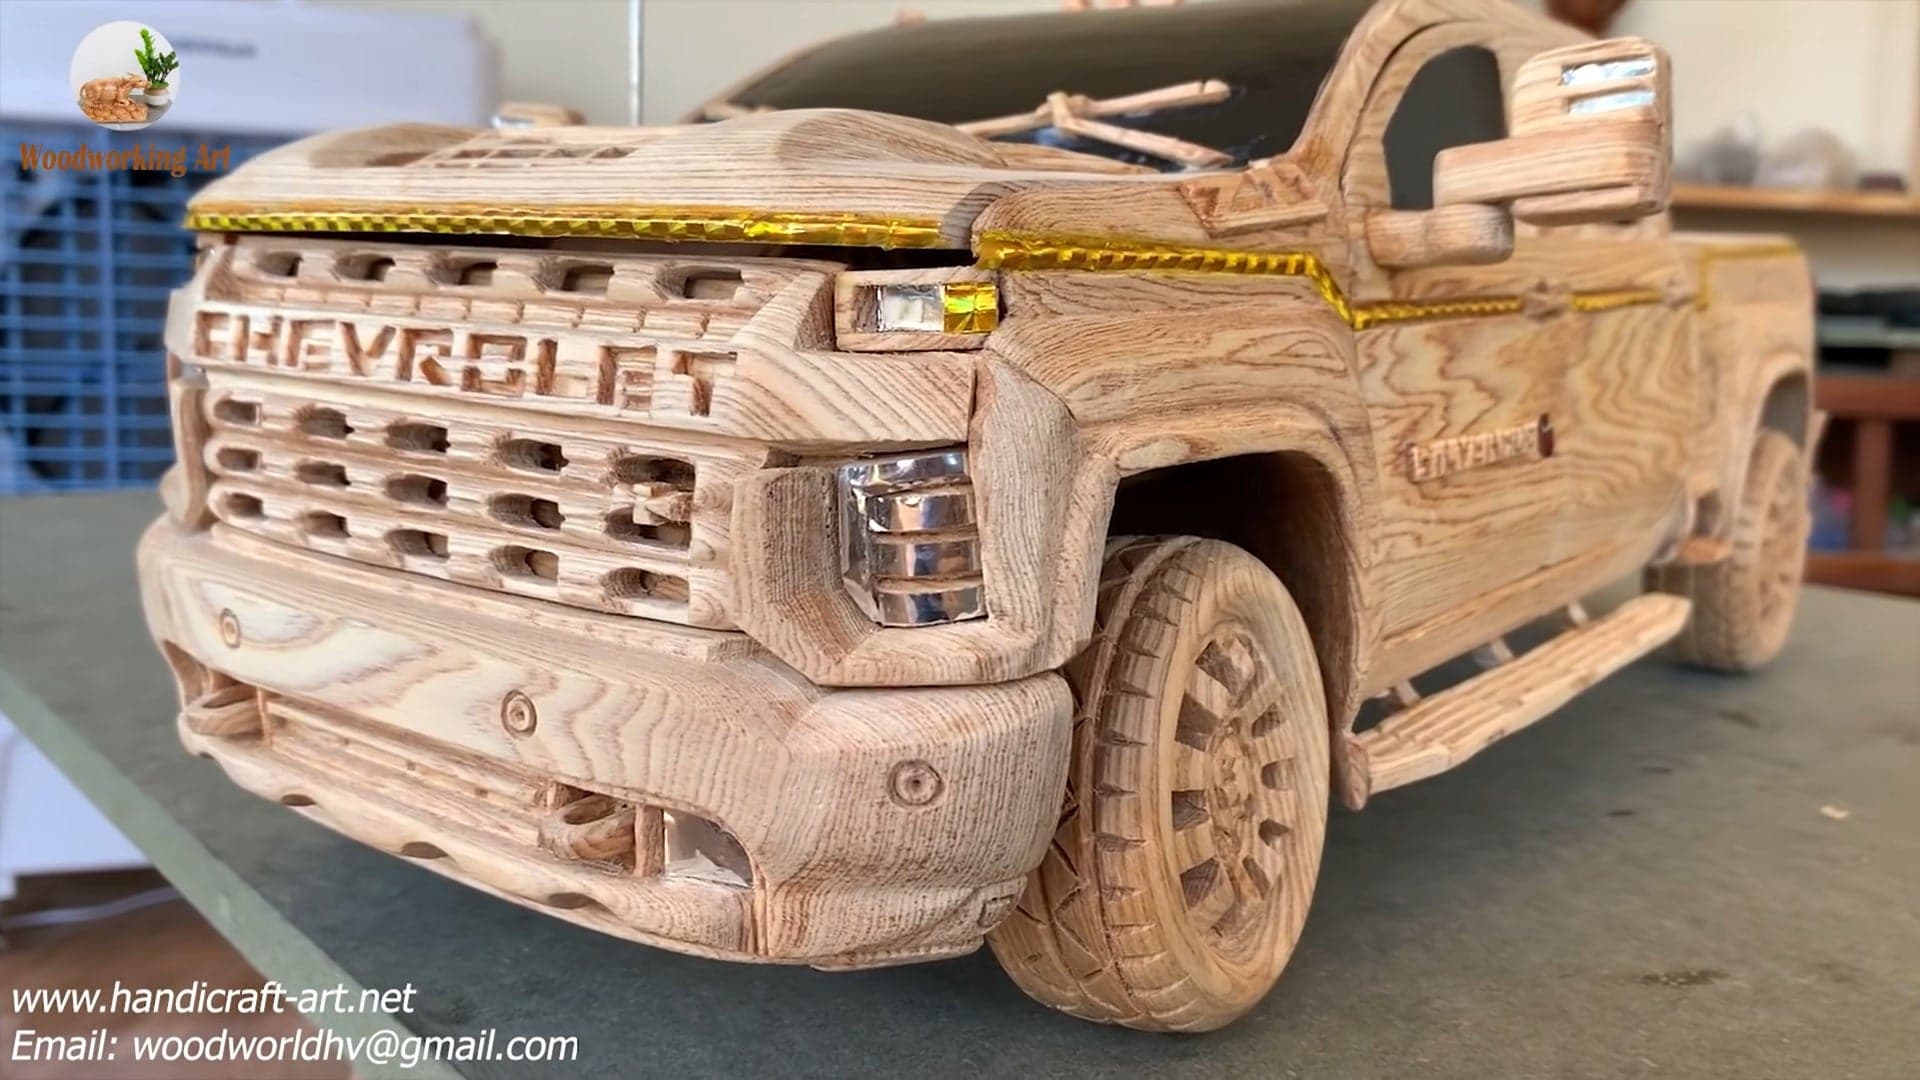 Carving a Chevy Silverado Out of Wood Is Hard. Making It Functional Is Even Harder